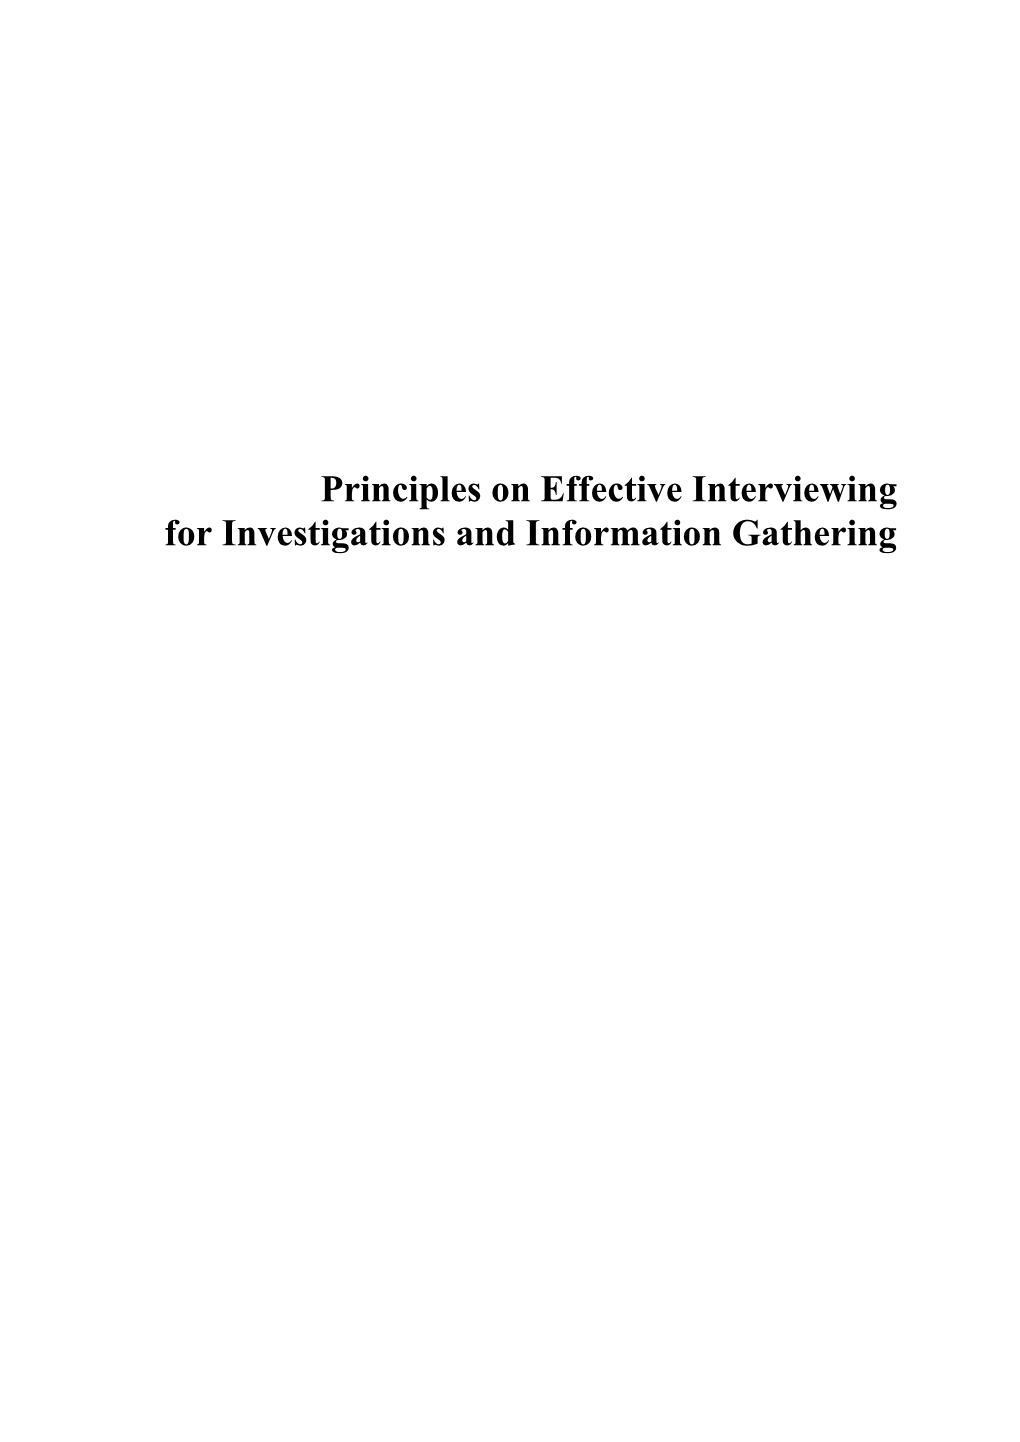 Principles on Effective Interviewing for Investigations and Information Gathering